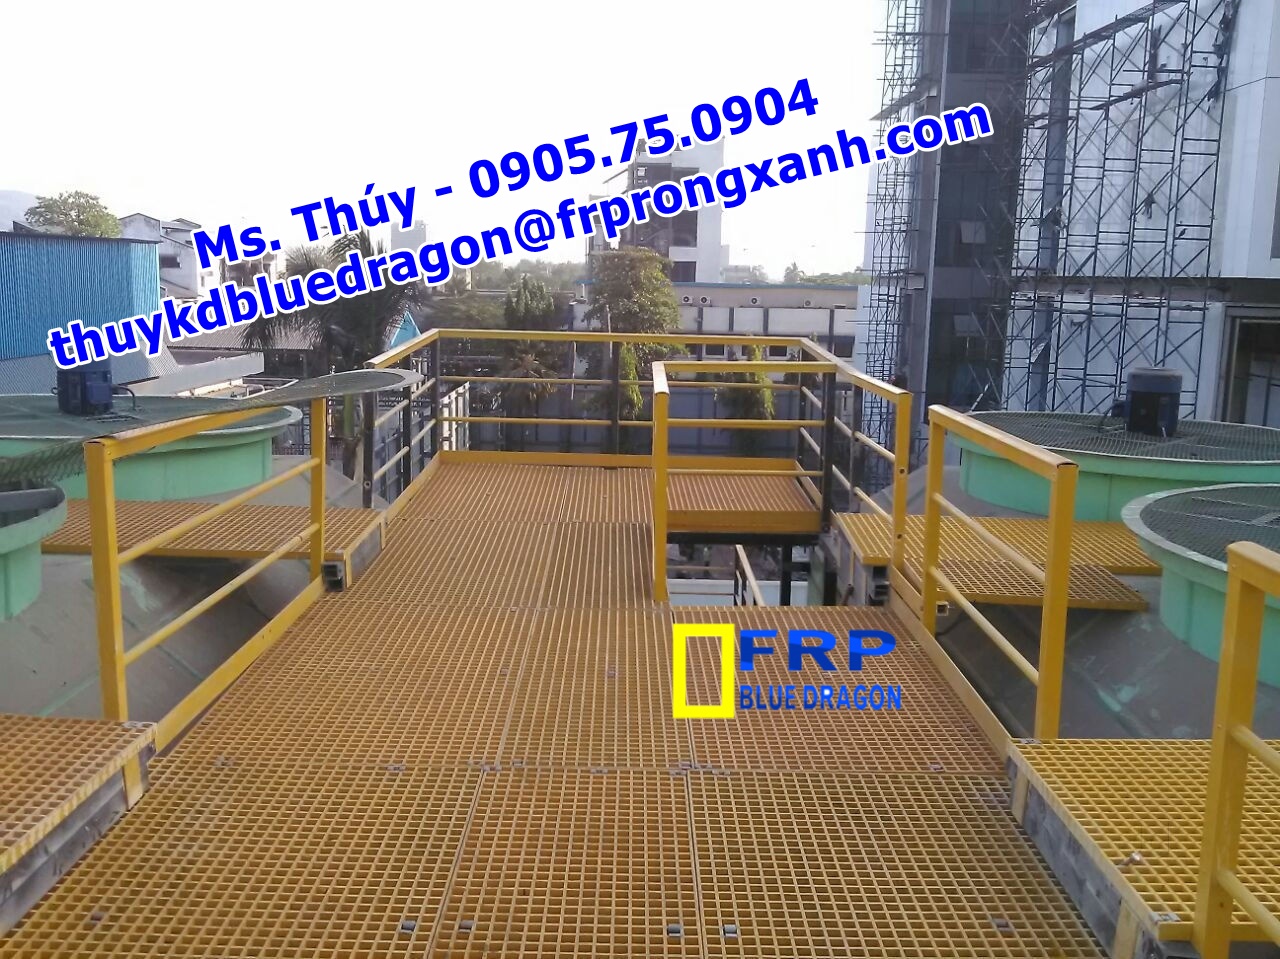 fibrock-composites-thane-cable-tray-dealers-10jxwsv.jpg